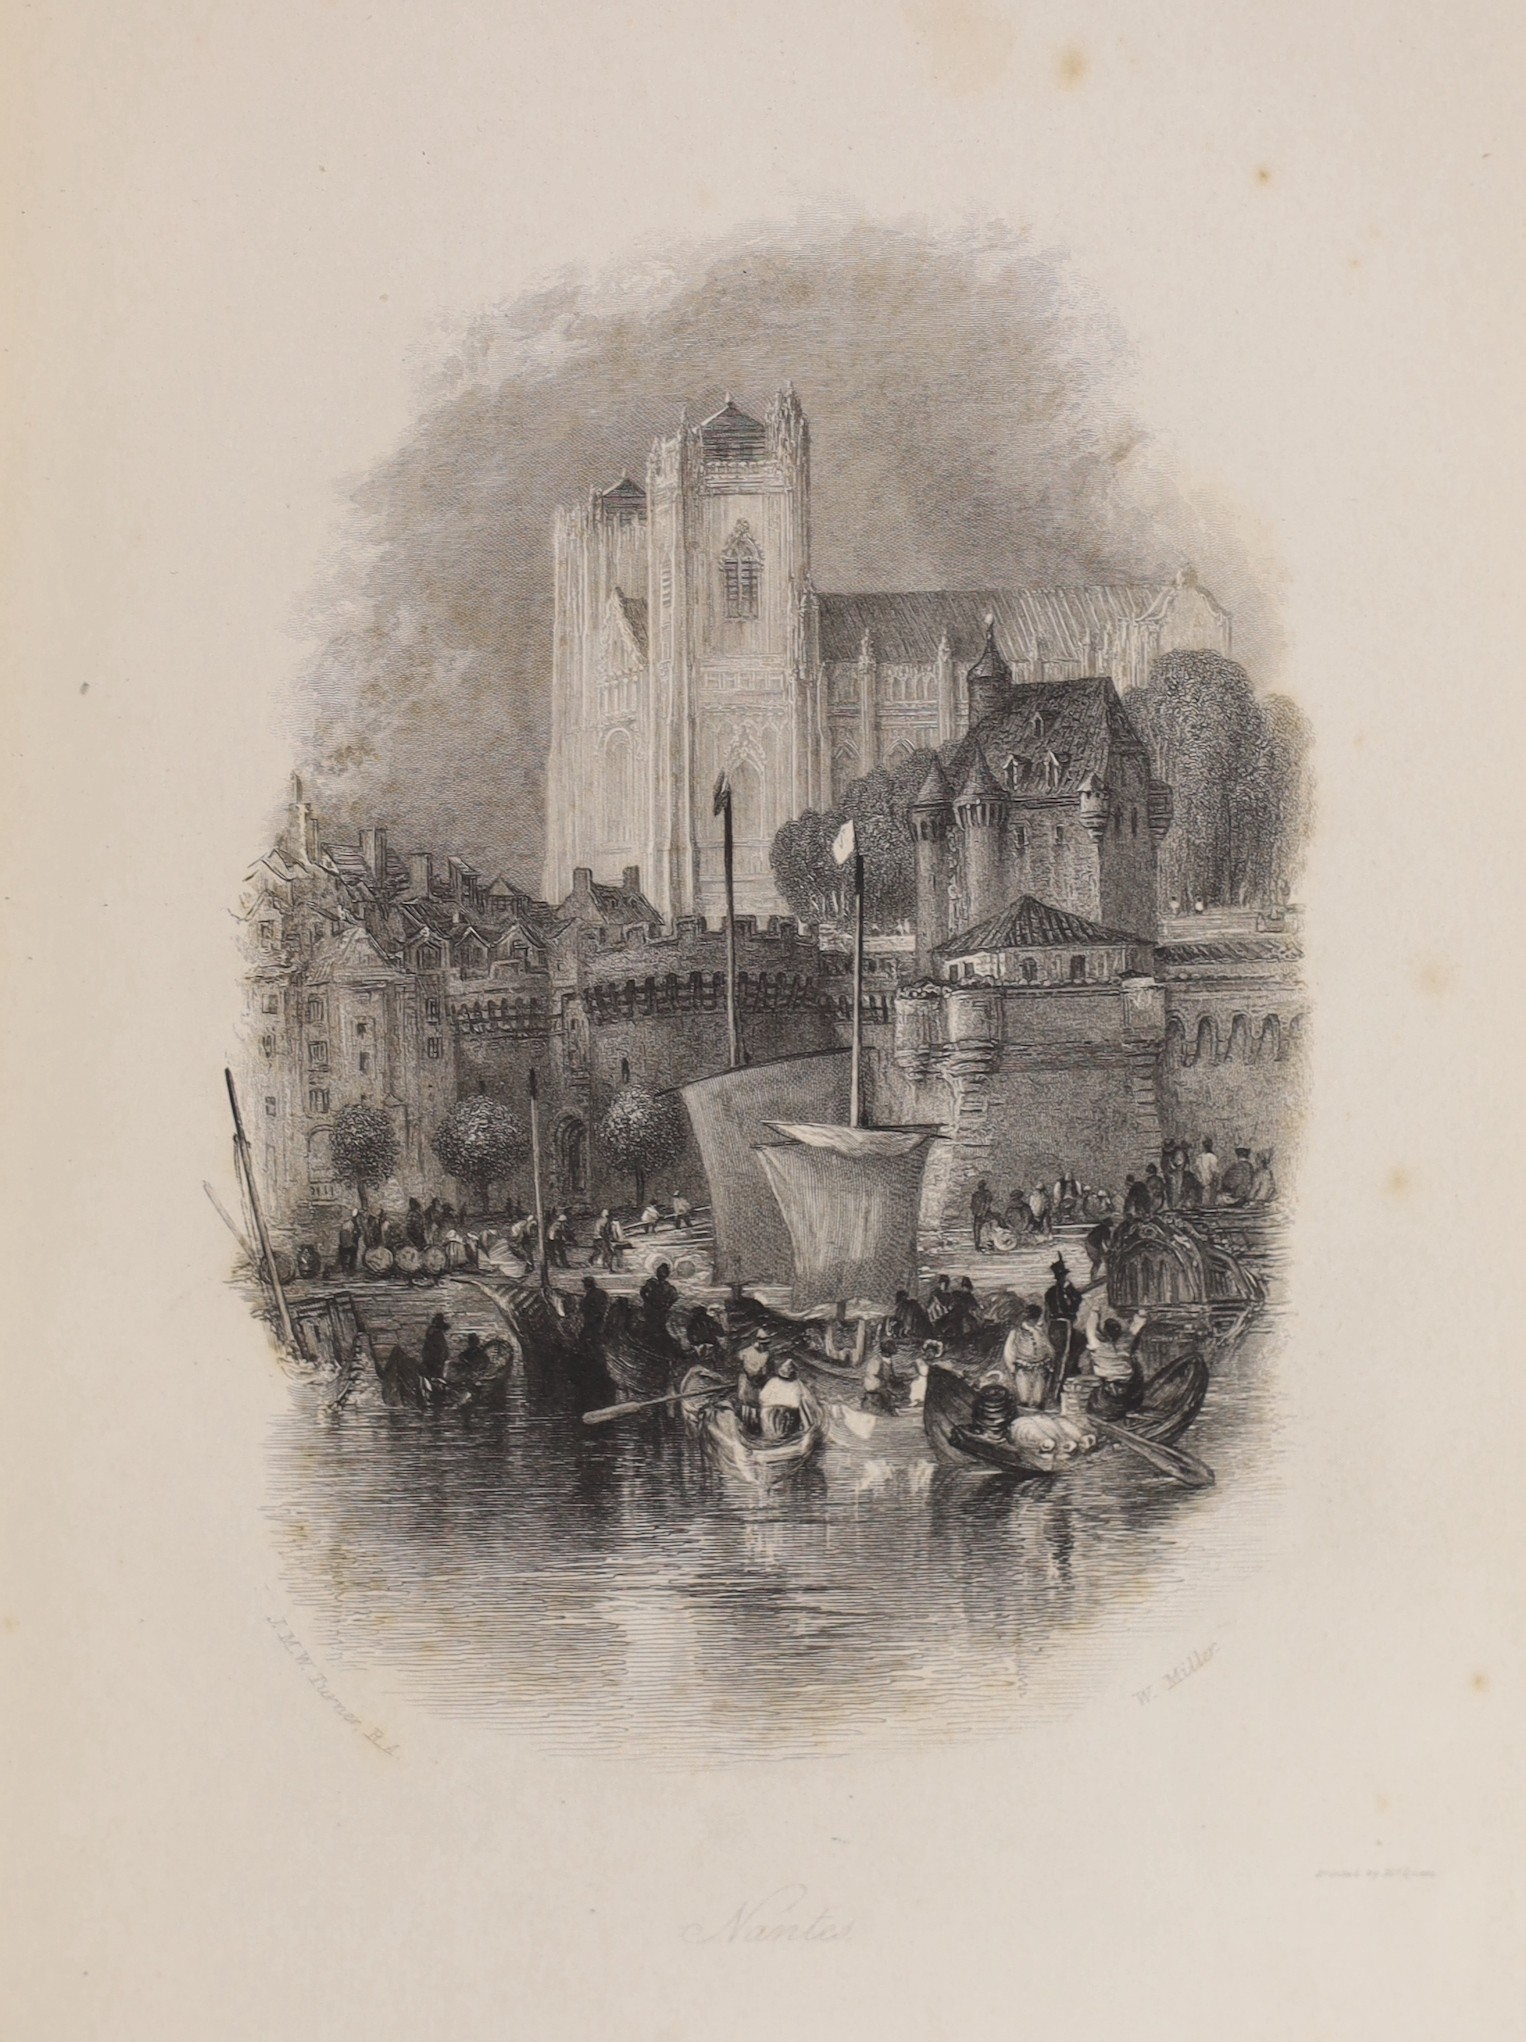 Ritchie, Leitch - Wanderings by the Loire, illustrated by J.M.W. Turner, 8vo, morocco gilt with engraved title and 20 plates, London, 1833